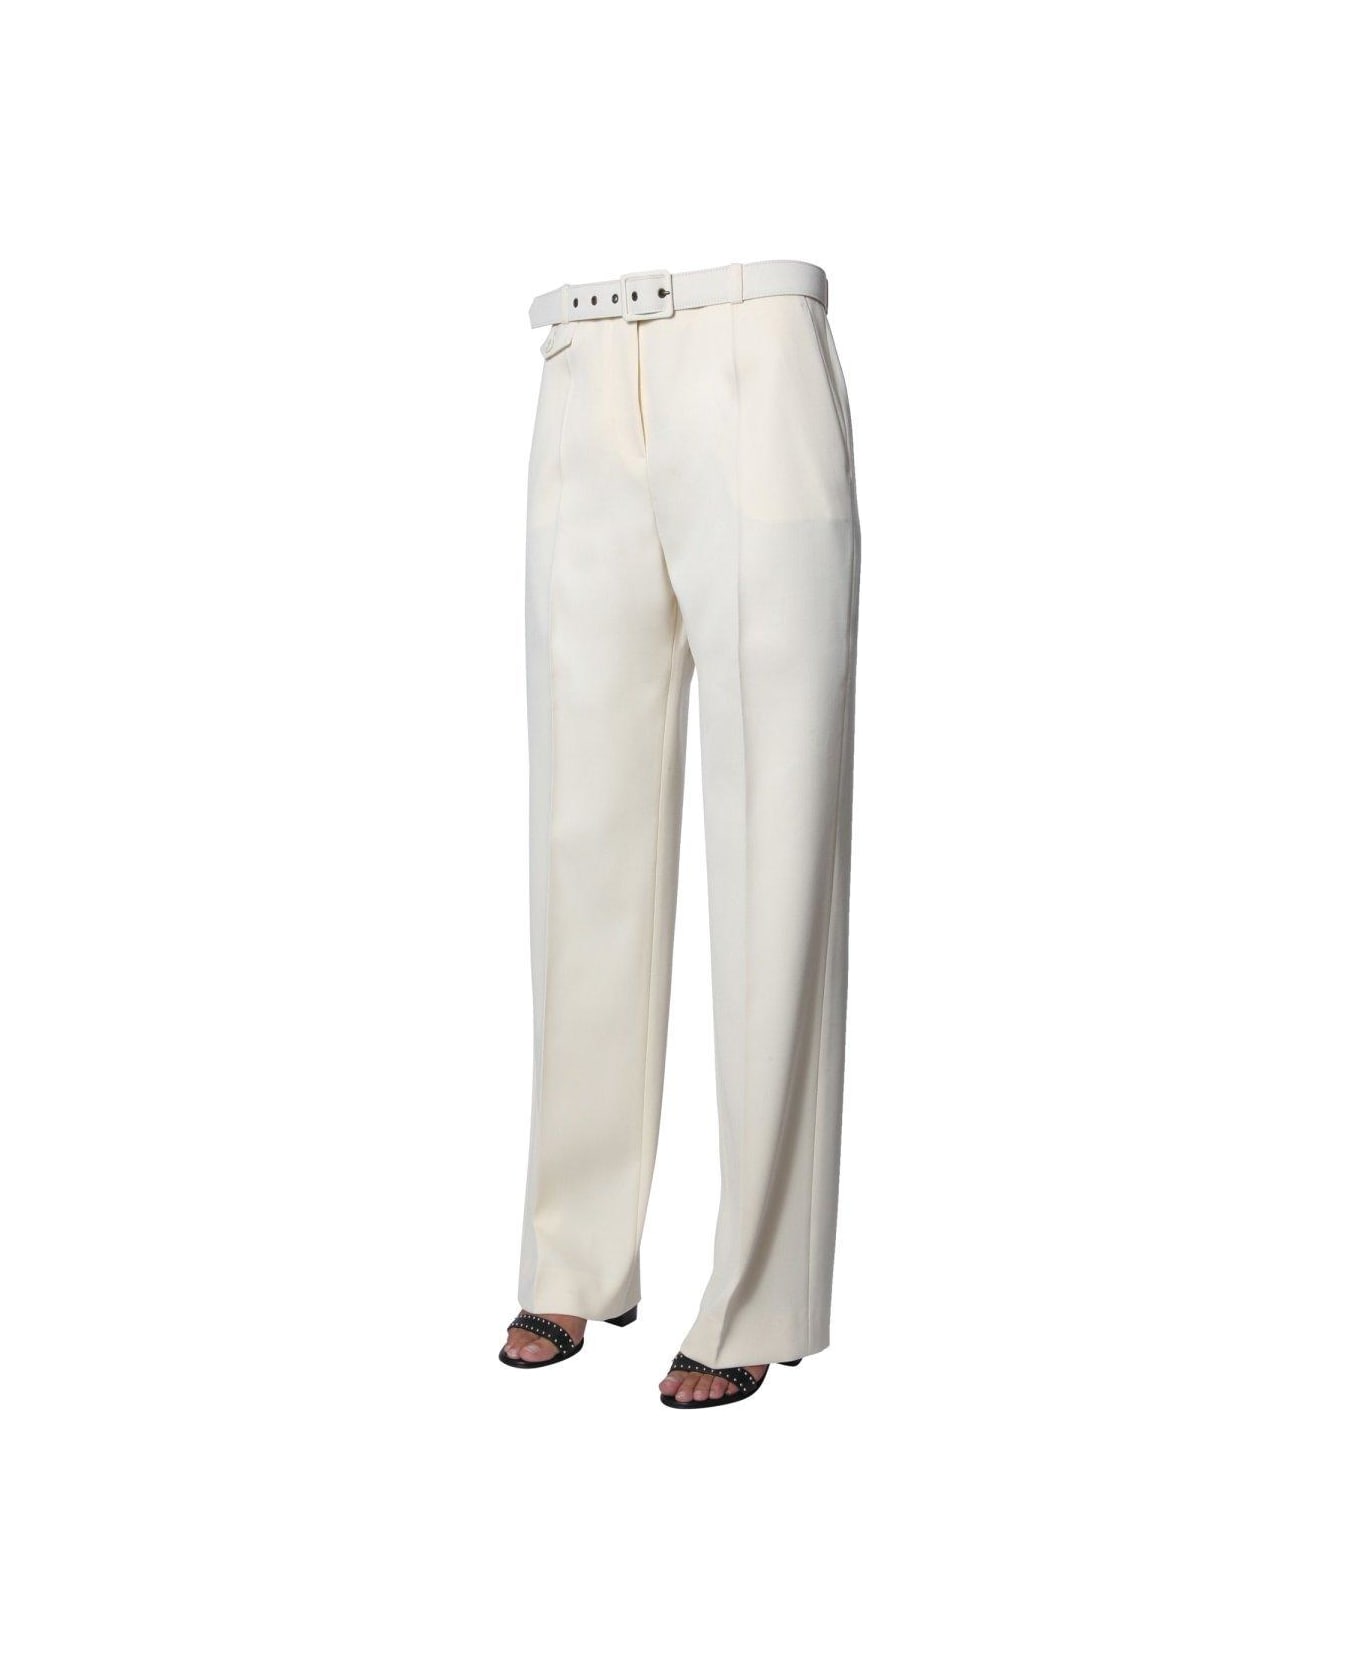 Givenchy Belted Tailored Pants - WHITE